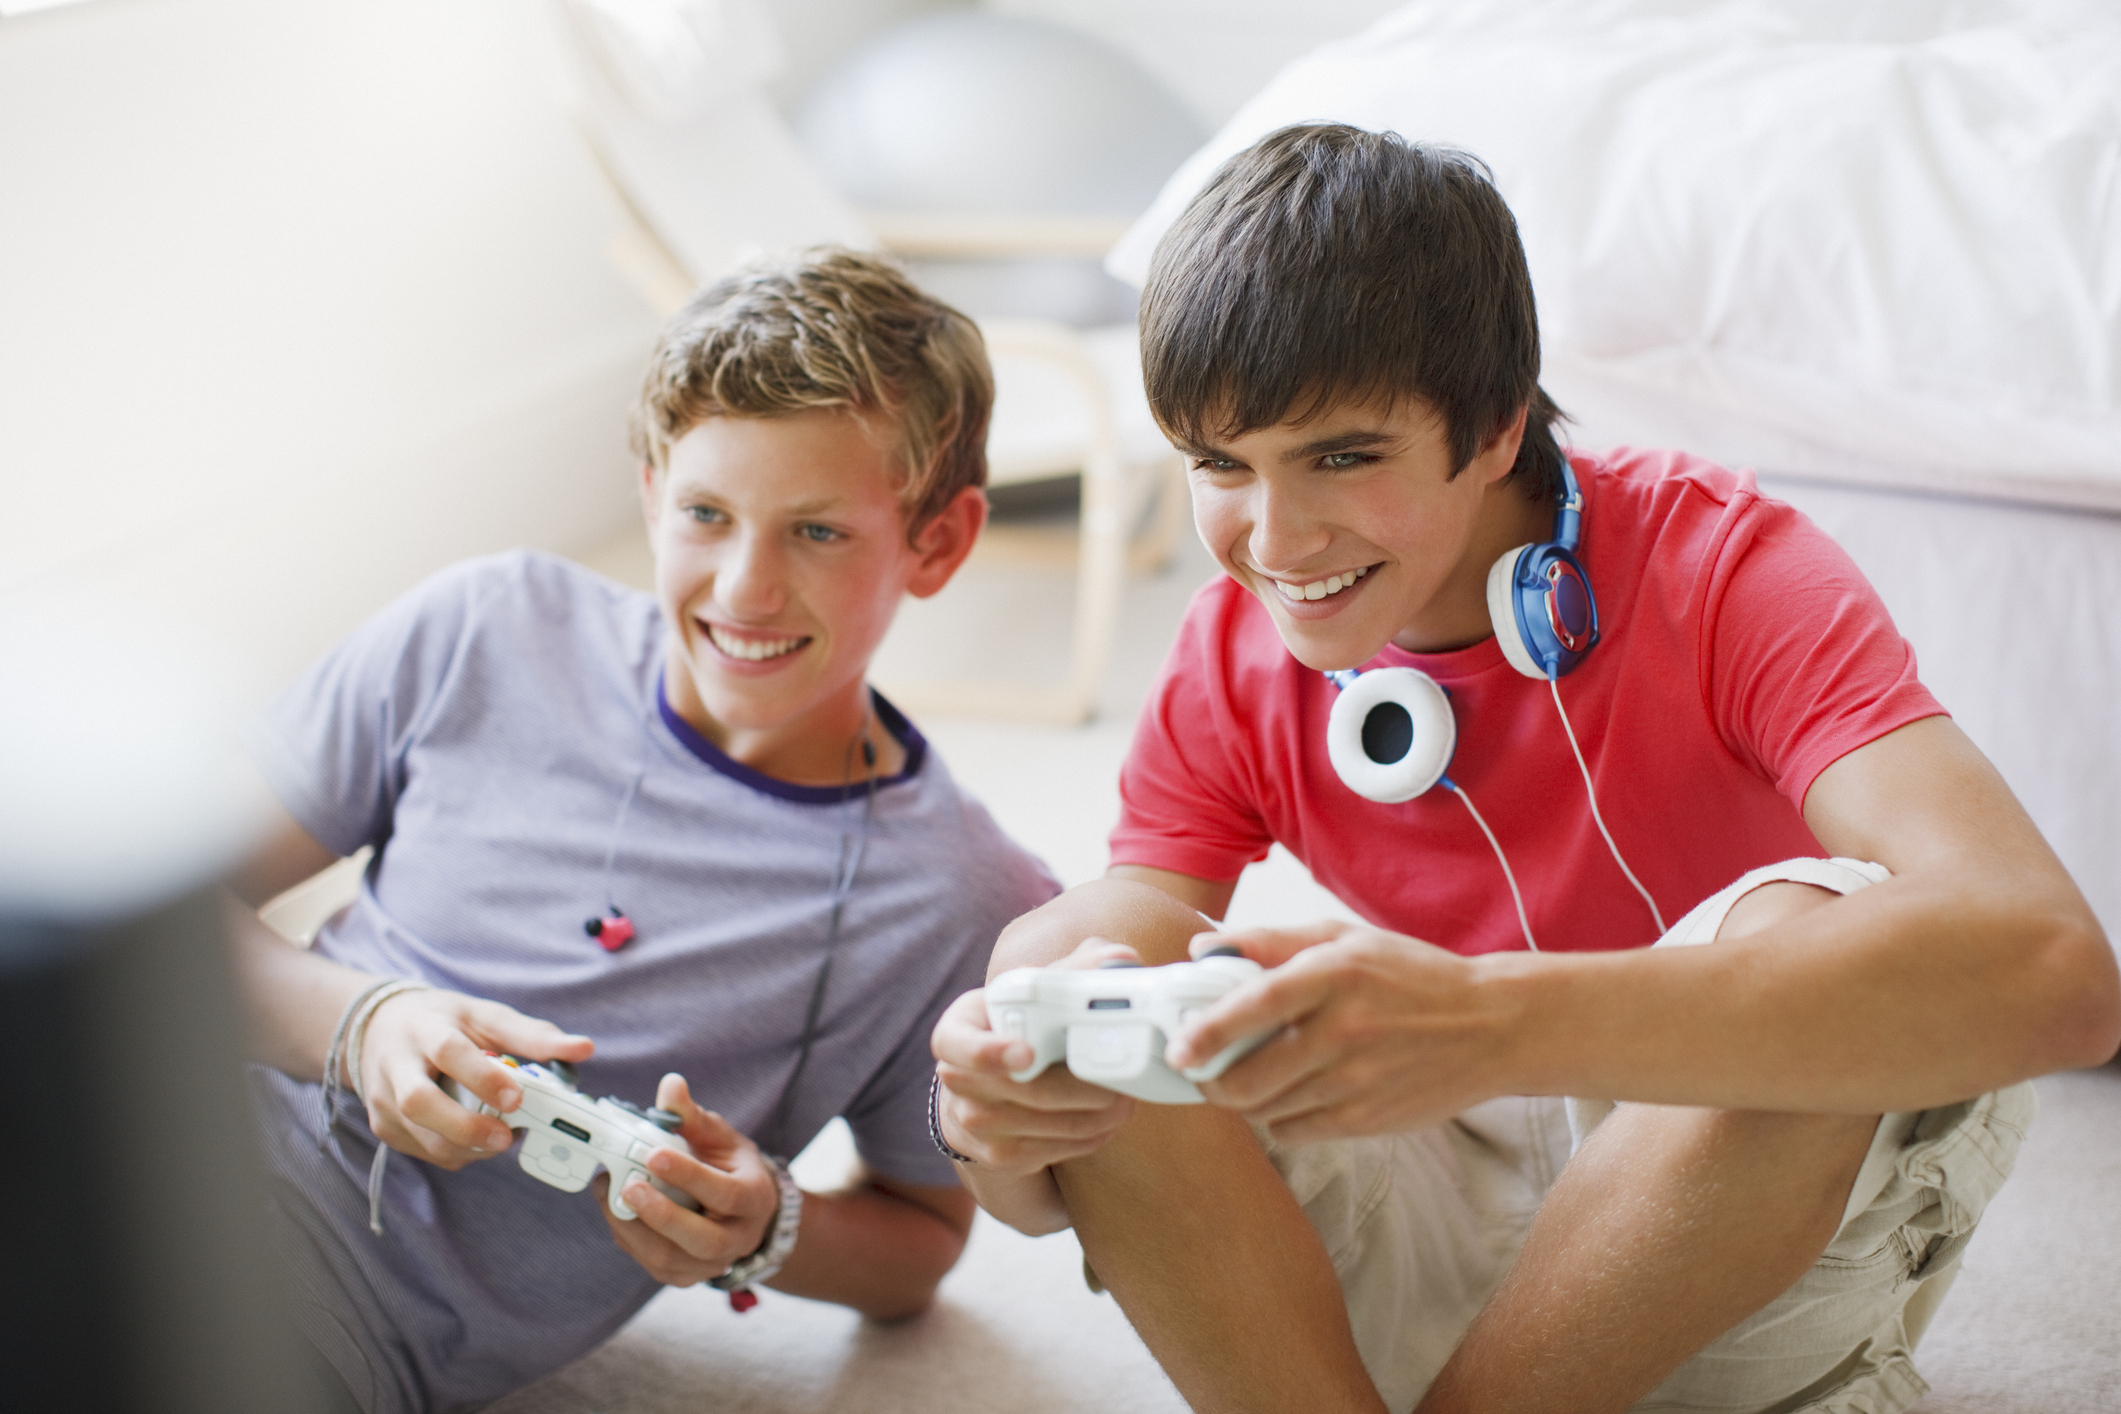 Educational Games You Want Your Kids to Get Hooked On